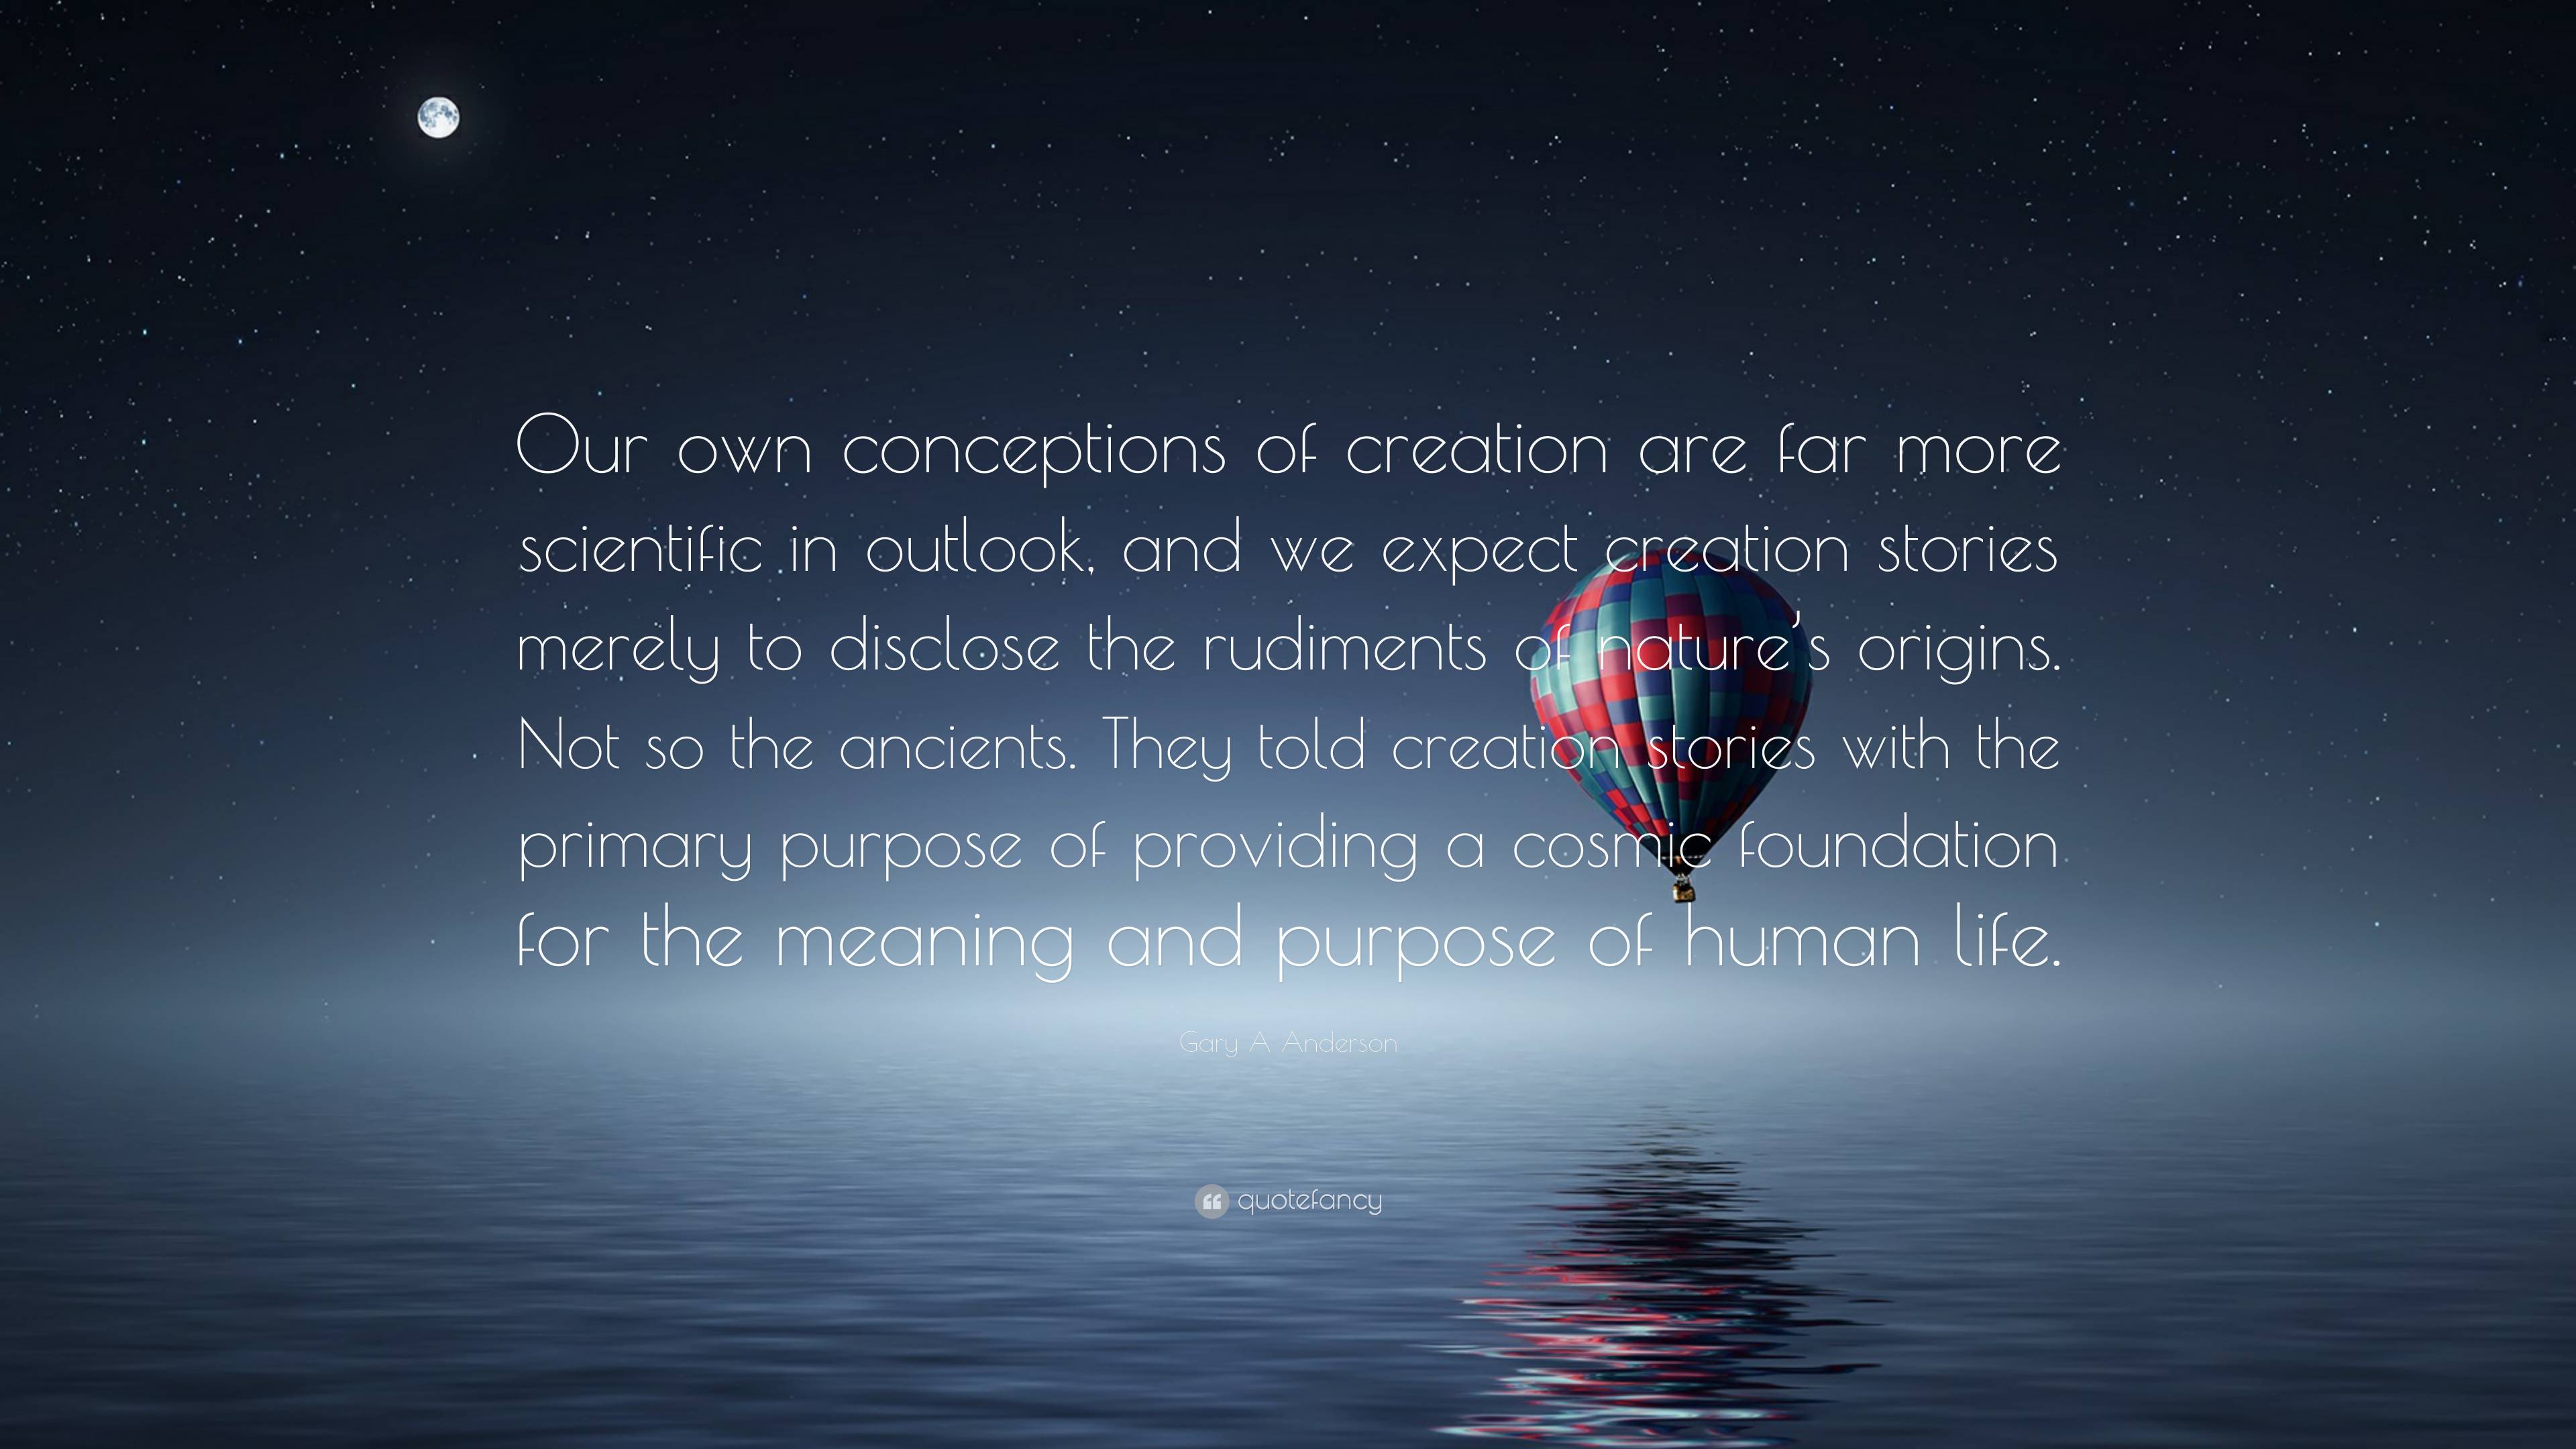 Gary A Anderson Quote: “Our own conceptions of creation are far more ...